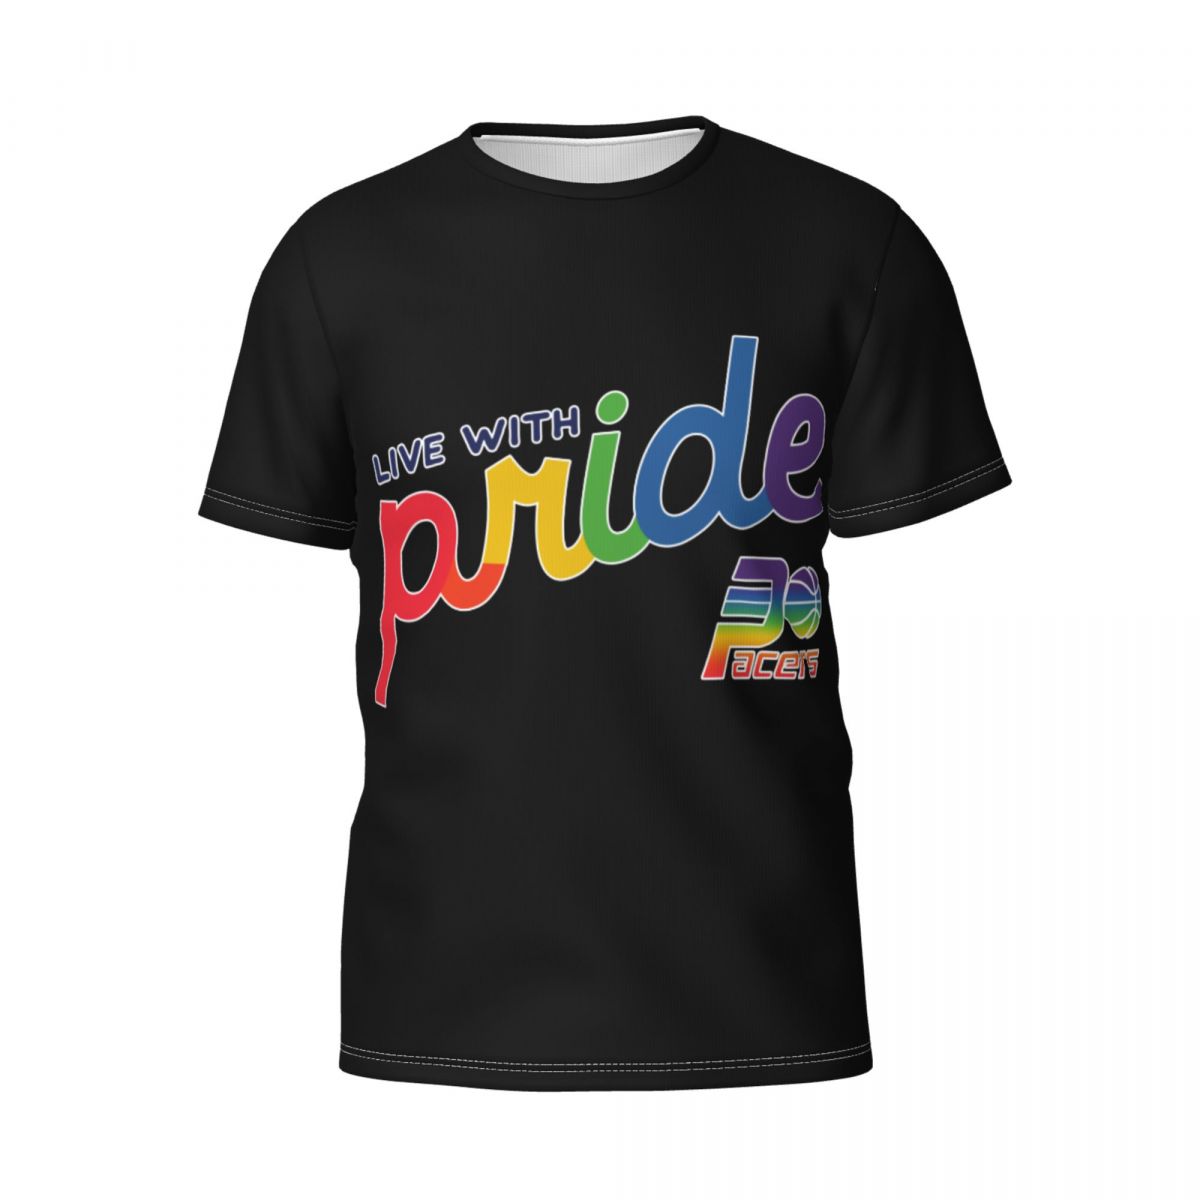 Indiana Pacers Live With Pride T-Shirt Men's